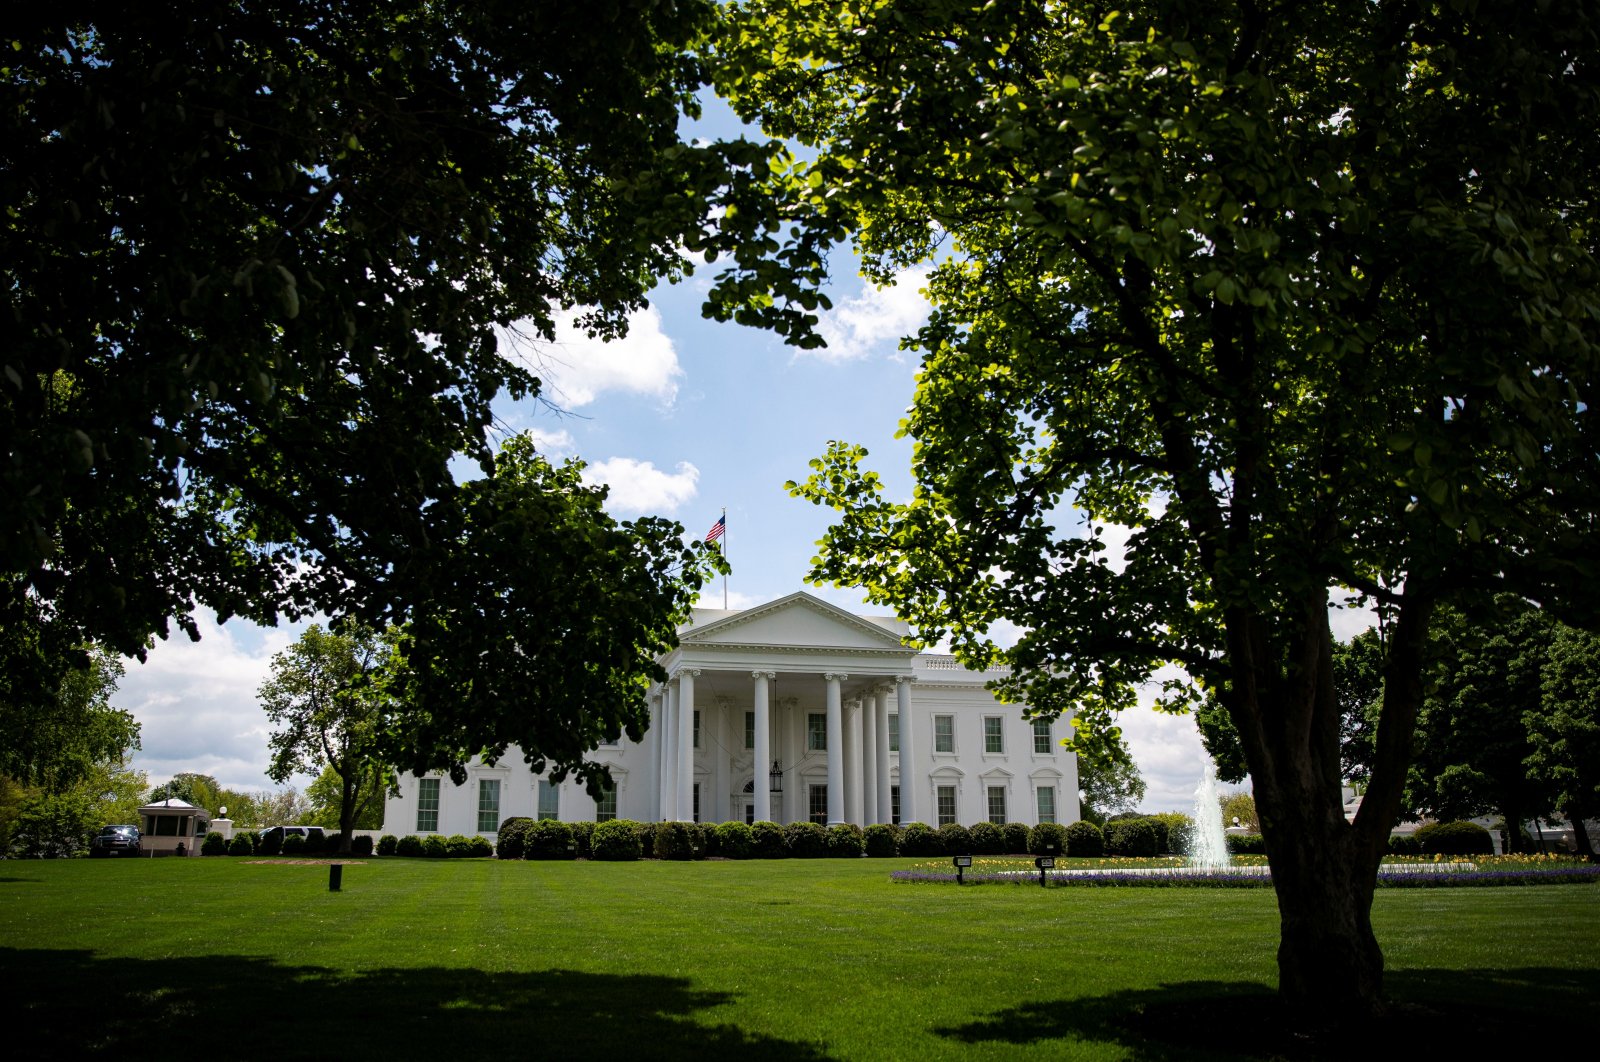 Trees obscure the White House in Washington, D.C., the U.S., April 25, 2021. (Reuters Photo)